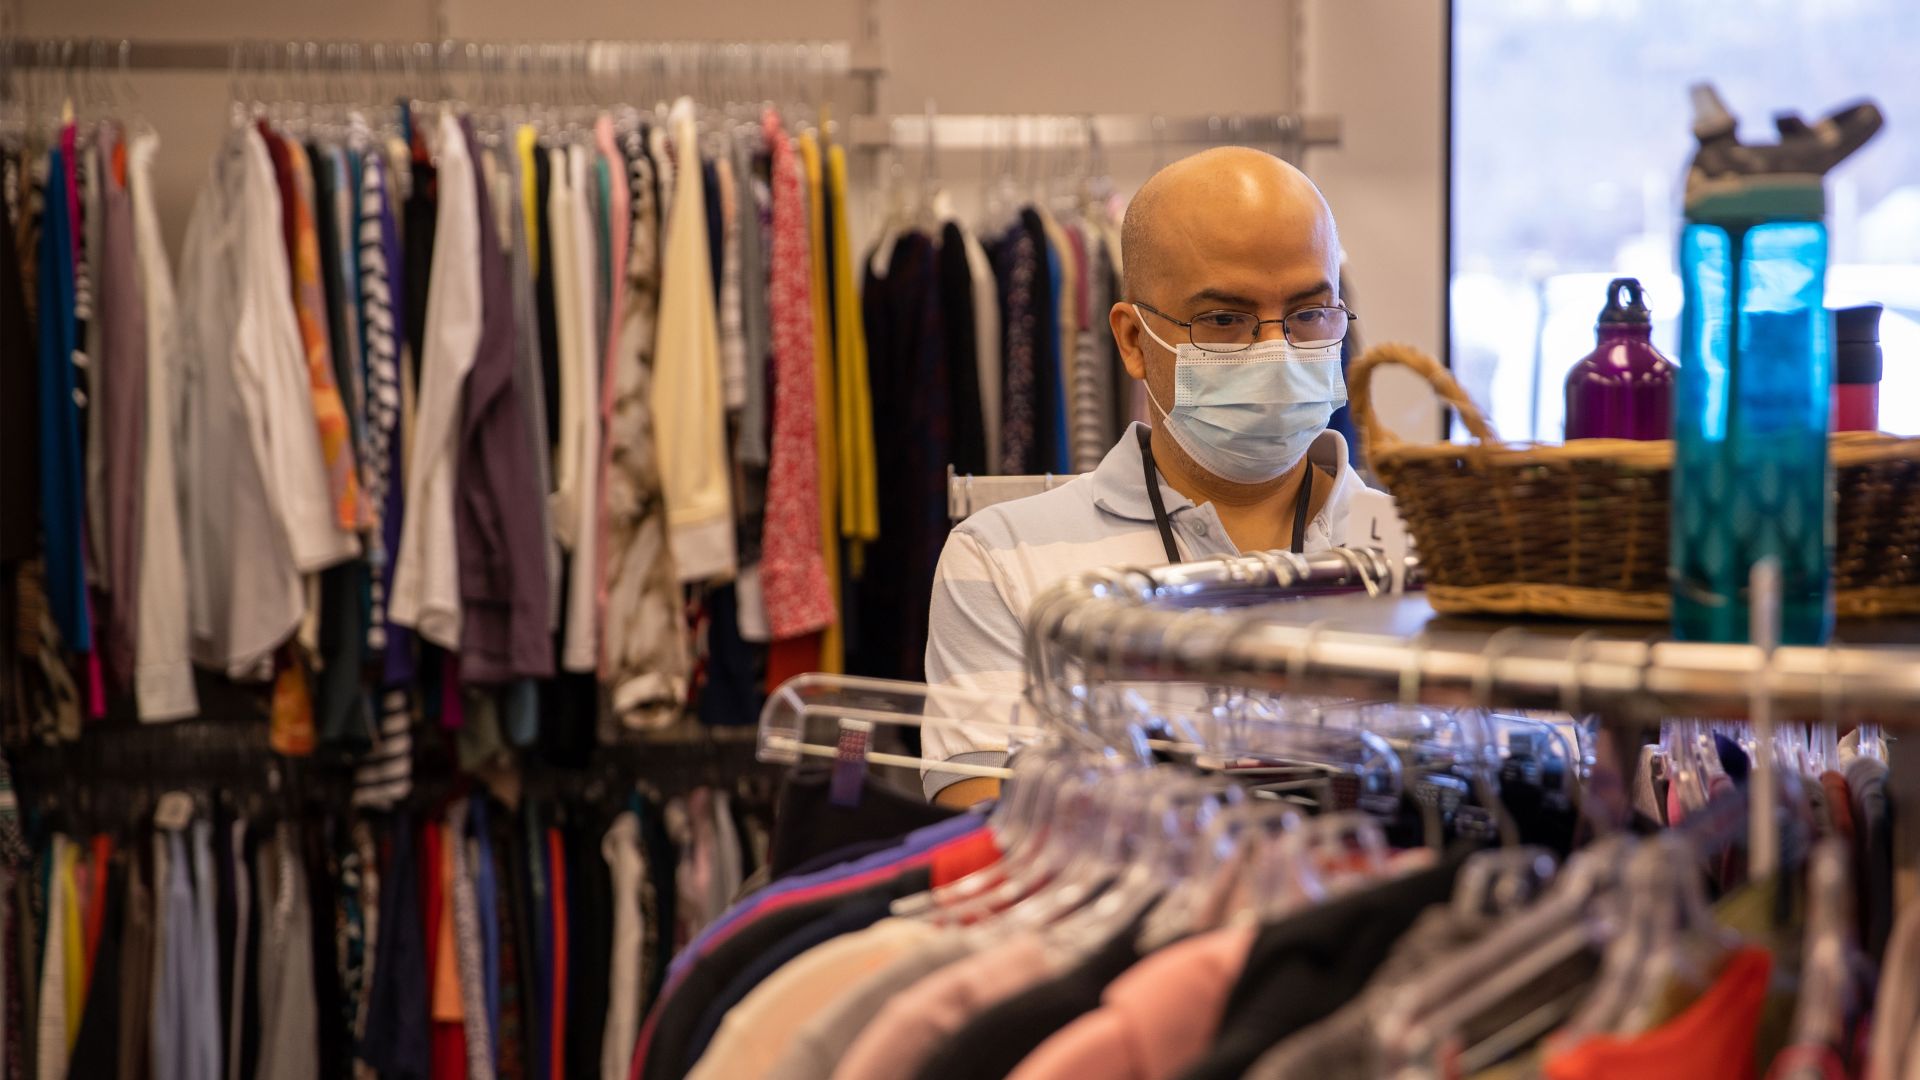 Person wearing glasses and a face mask looking through a clothing rack.